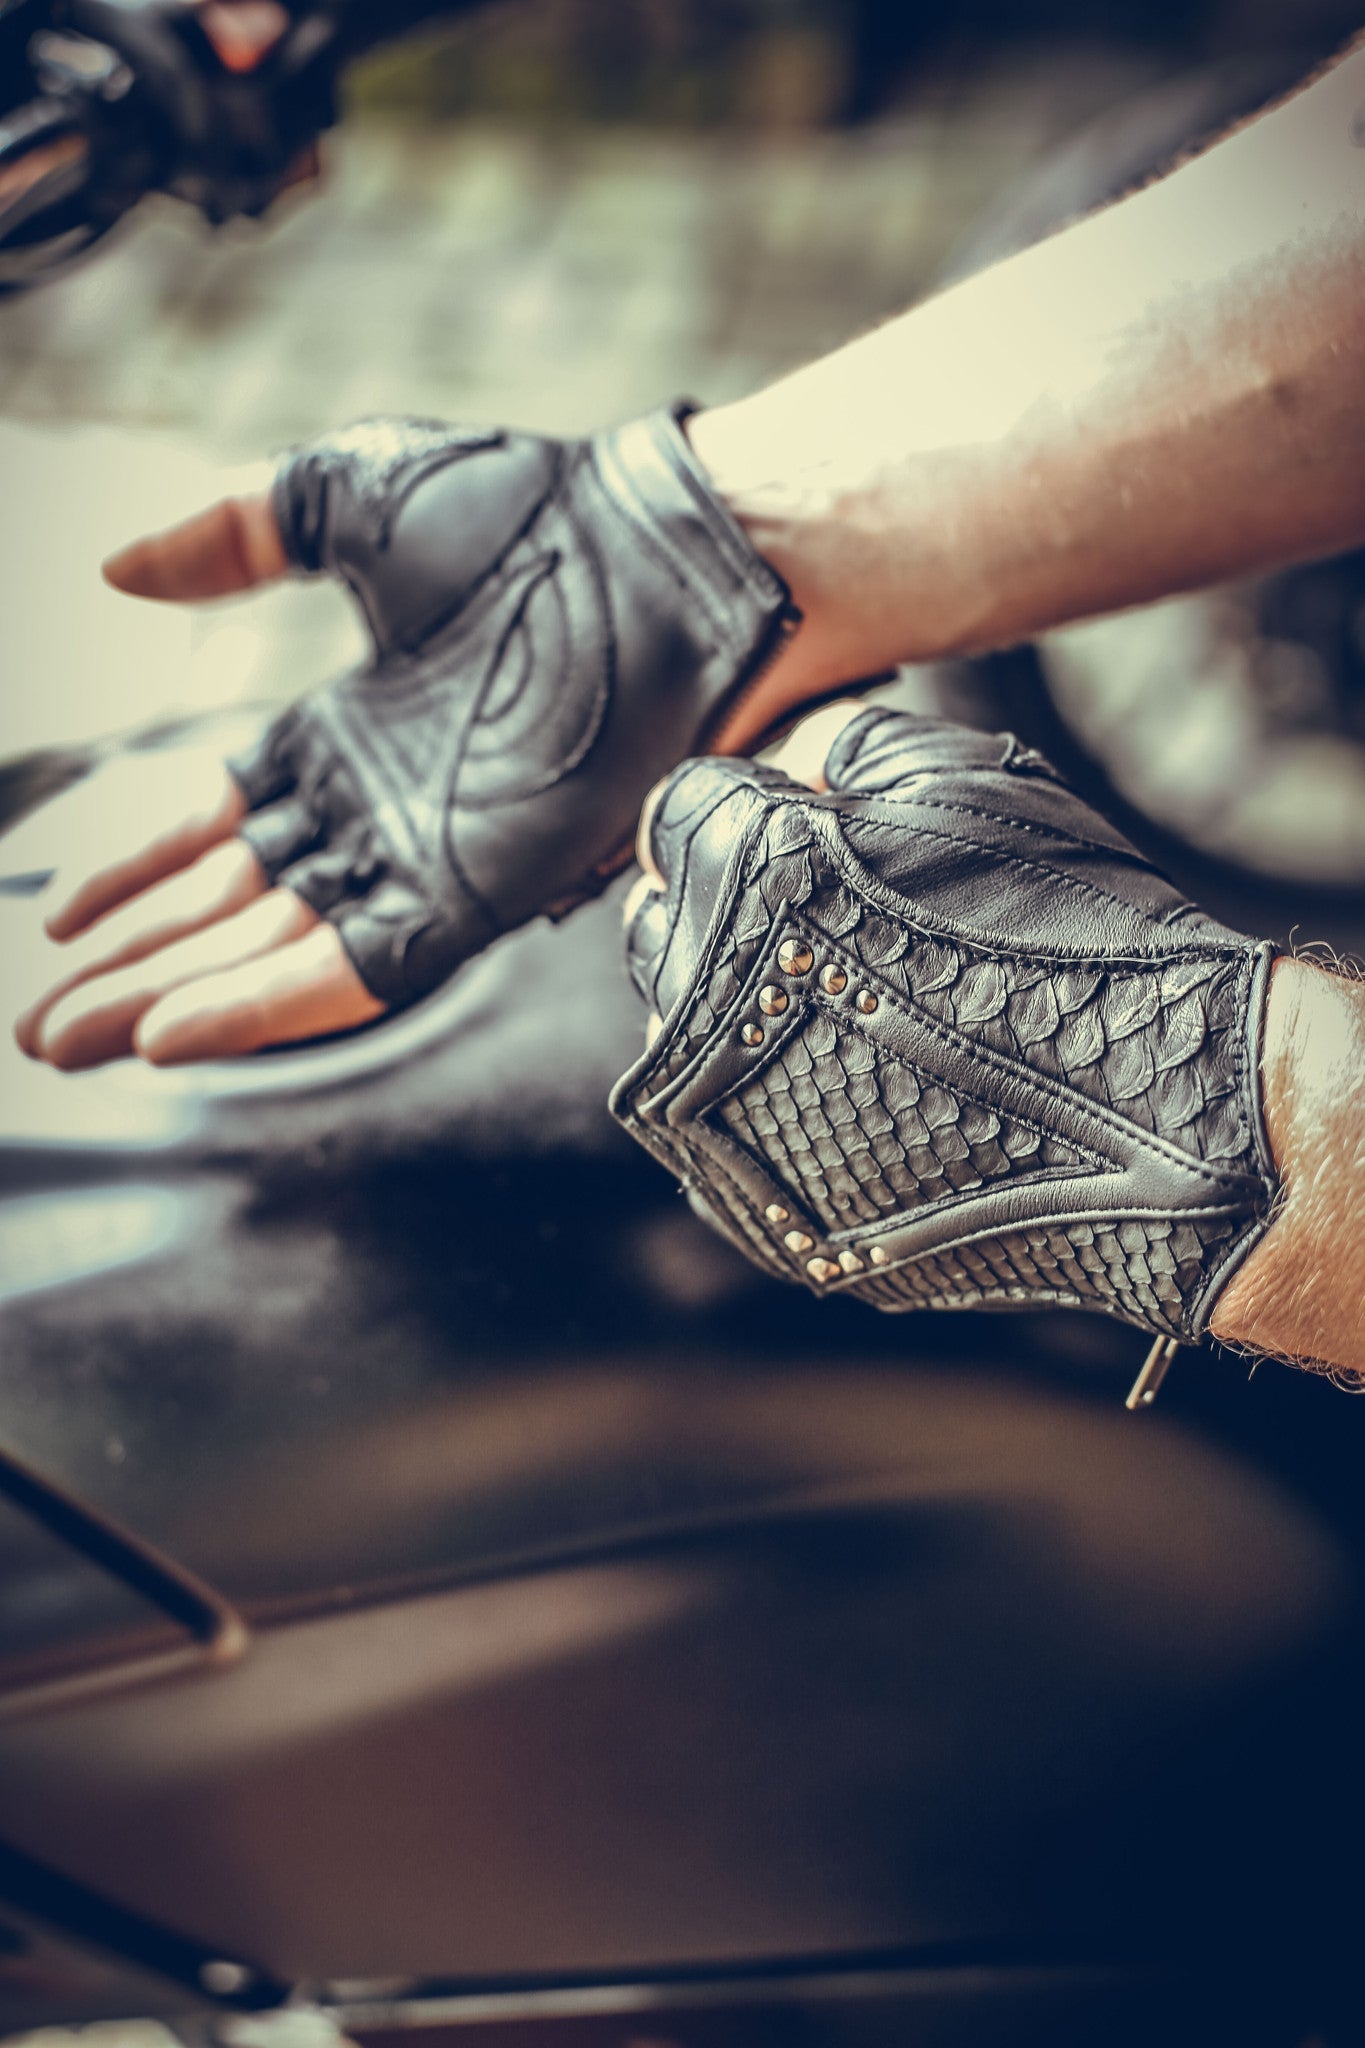 black leather DragonScale gloves on motorcycle- anahata designs fingerless leather python gloves perfect for burning man or cosplay